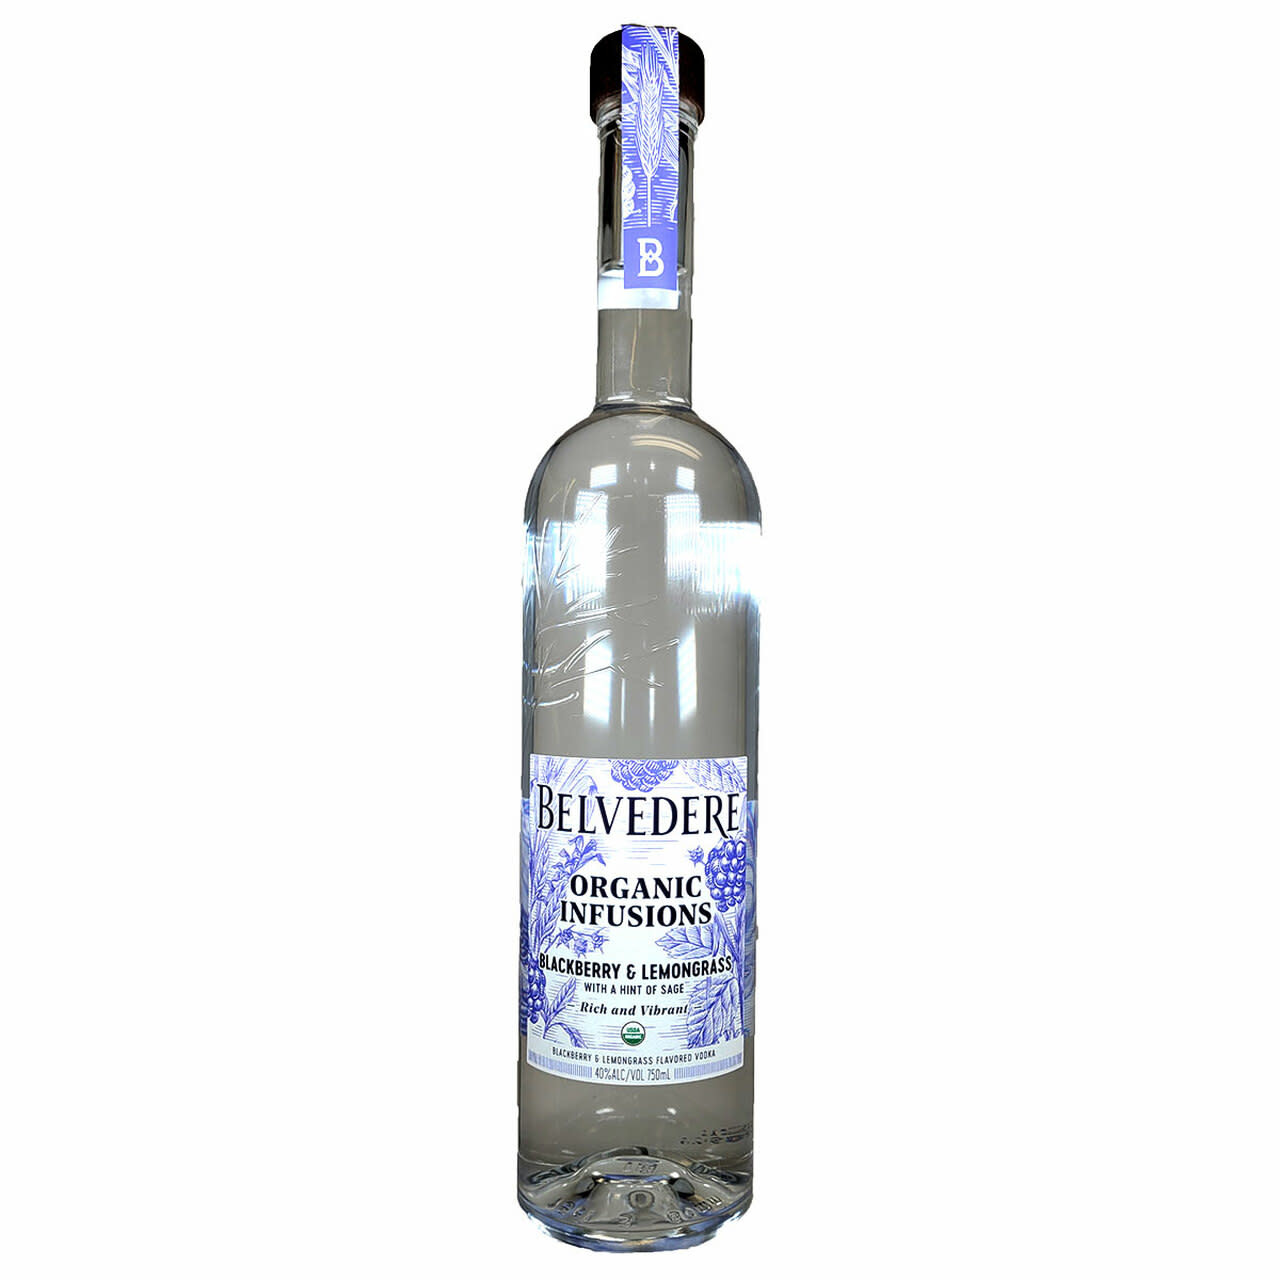 Truly refreshing: Belvedere Organic Infusions - Brummell